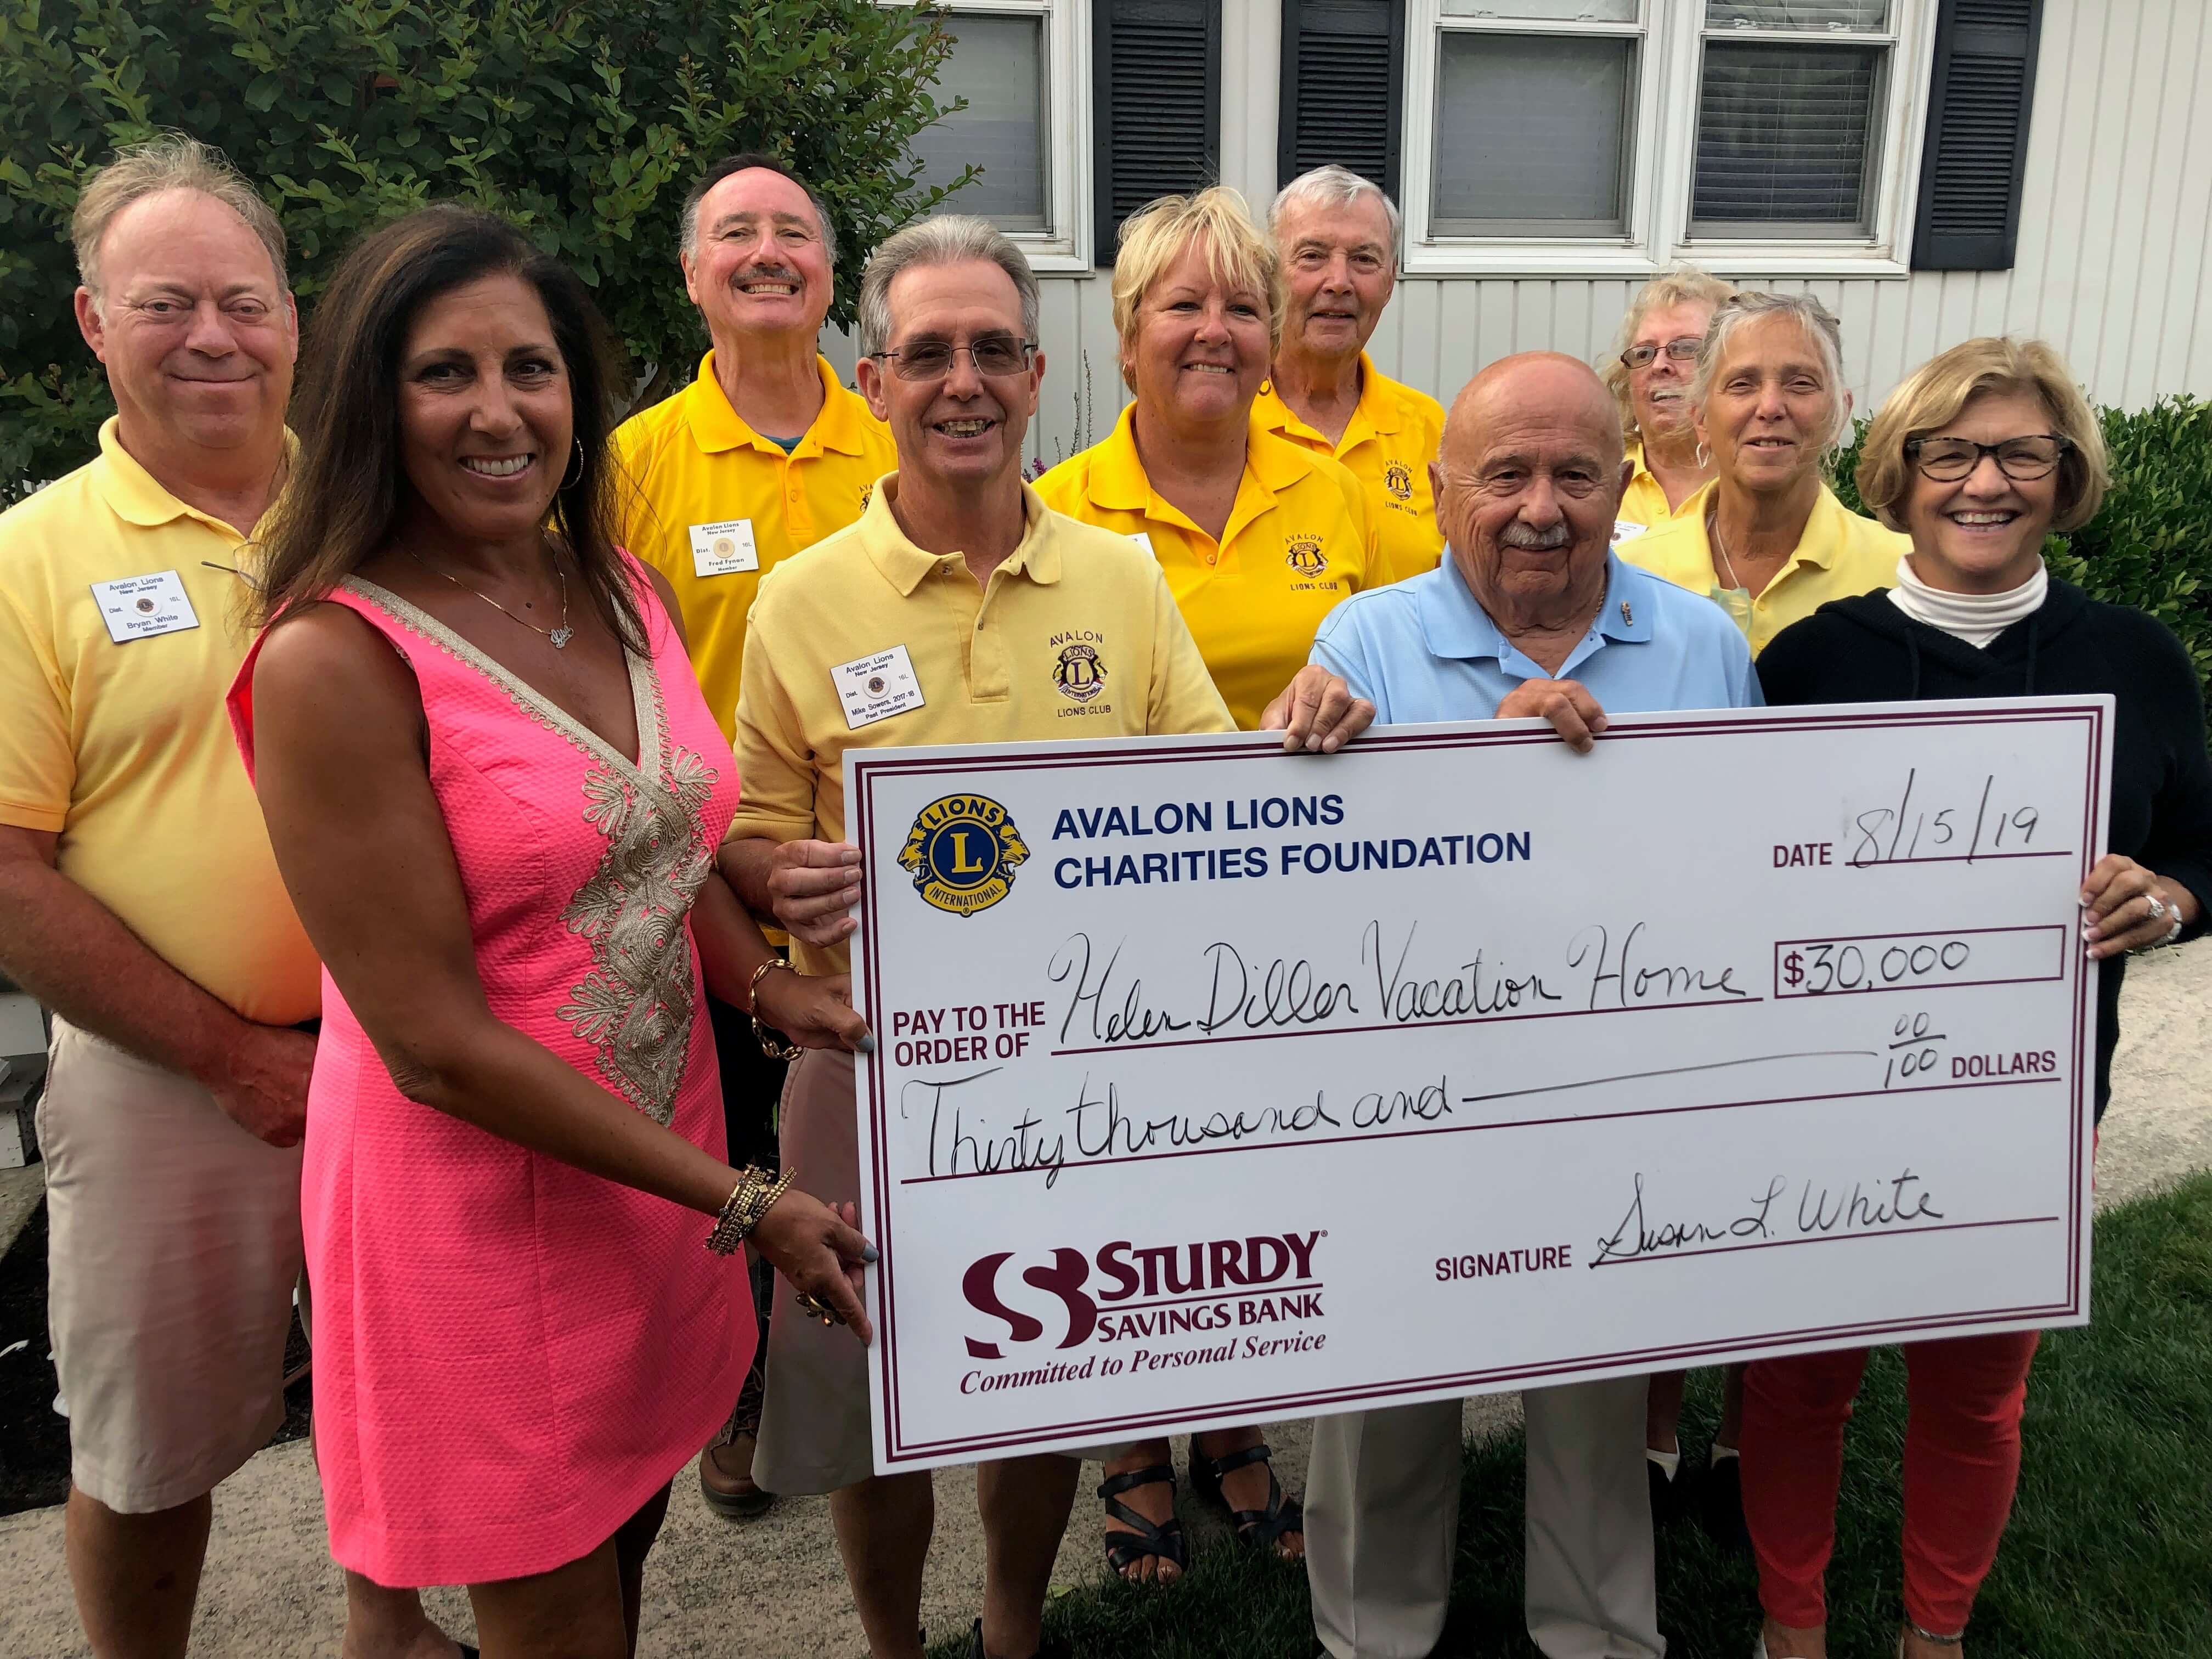 Members of the Avalon Lions Club present the Helen L. Diller Vacation Home For Blind Children with a check of $30